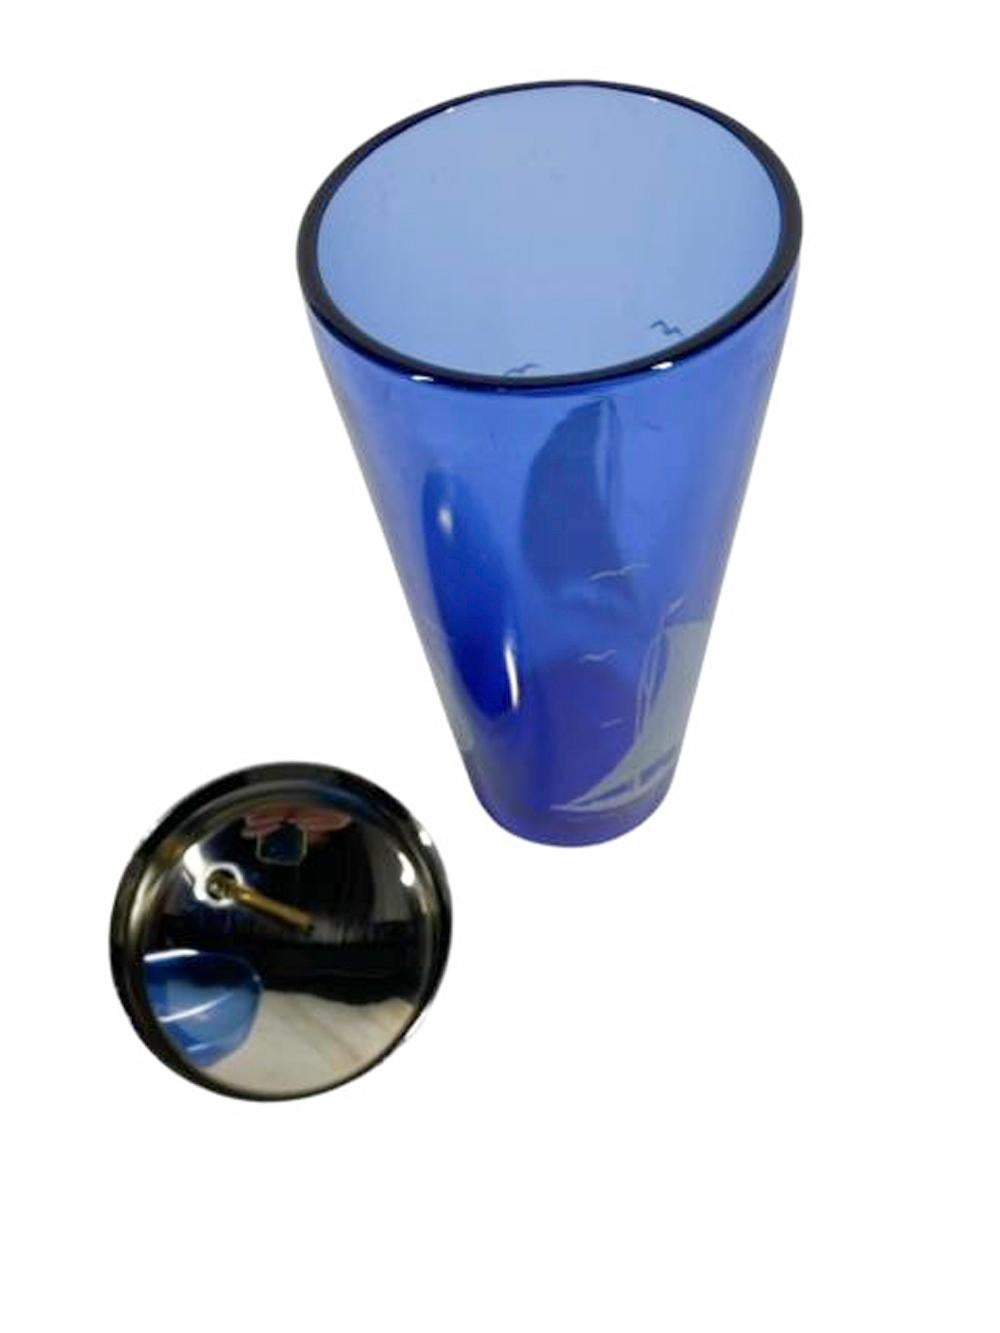 American Hazel-Atlas Cobalt Cocktail Shaker and 6 Glasses with White Sailboats and Birds For Sale